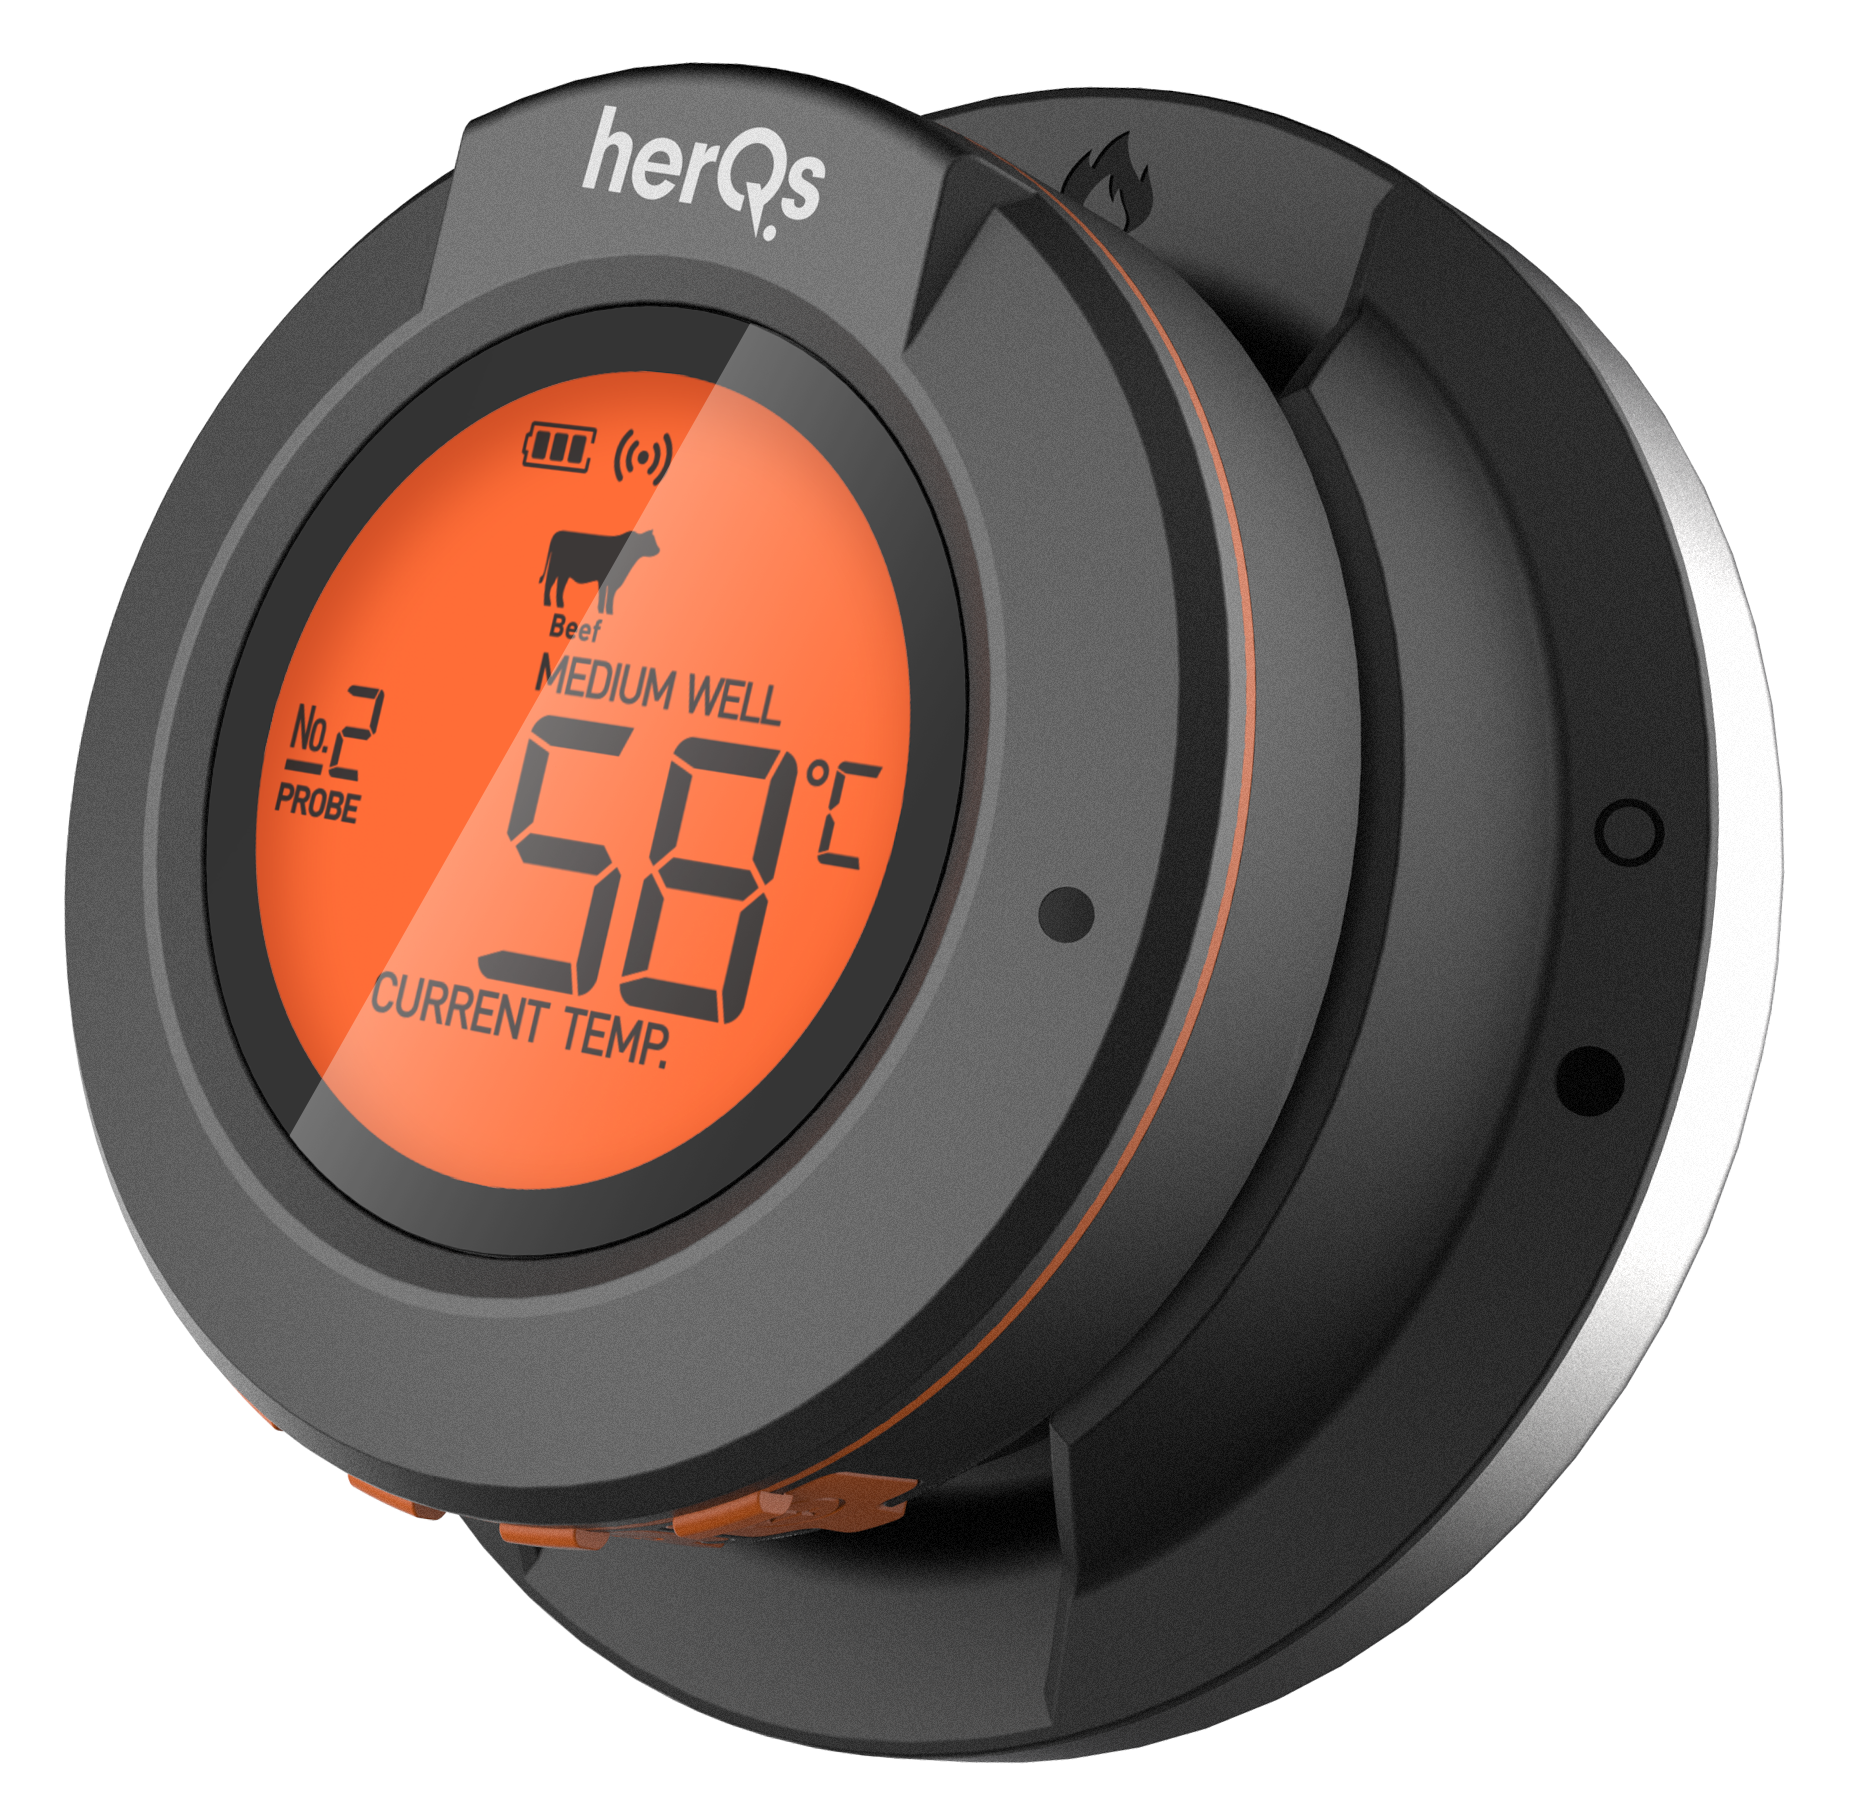 https://www.sbsupply.eu/media/catalog/product/cache/16/image/9df78eab33525d08d6e5fb8d27136e95/h/e/herqs_-_connected_digital_dome_thermometer_.png